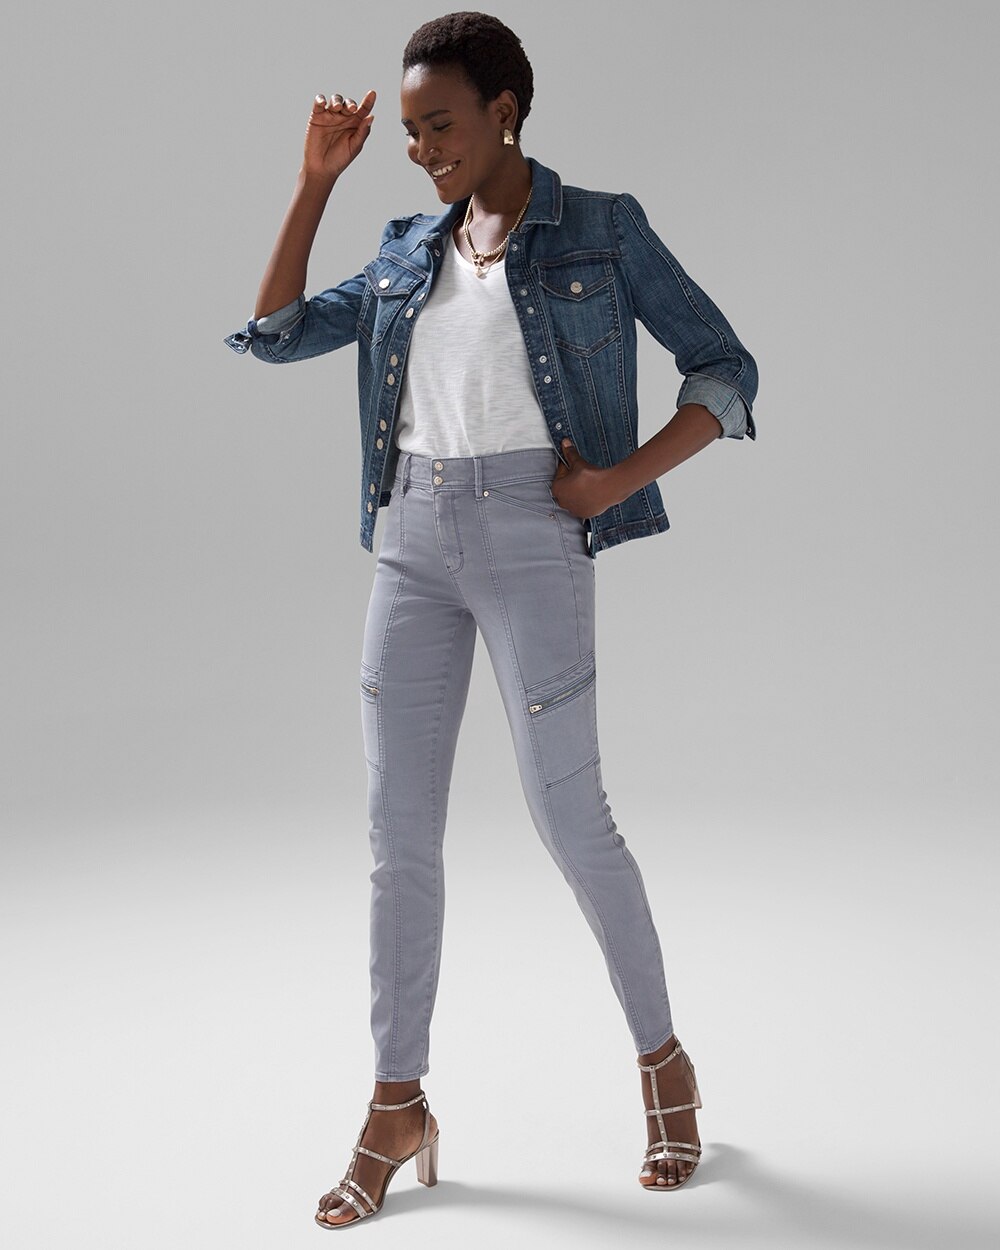 High-Rise Everyday Soft Denim\u2122 Skinny Jeans video preview image, click to start video